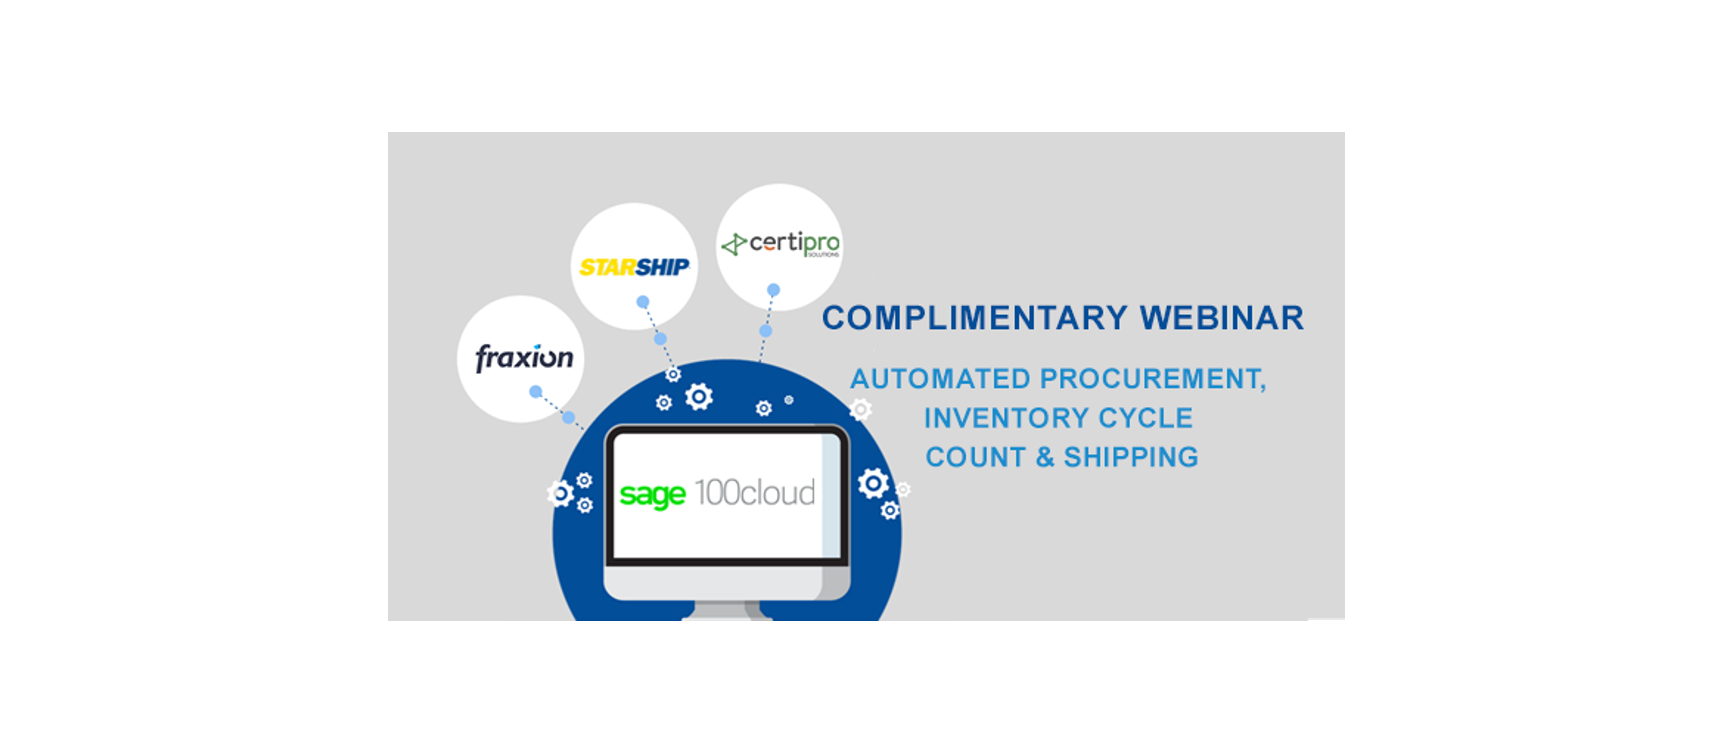 Sage 100cloud: Automated Procurement, Inventory Cycle Count and Shipping